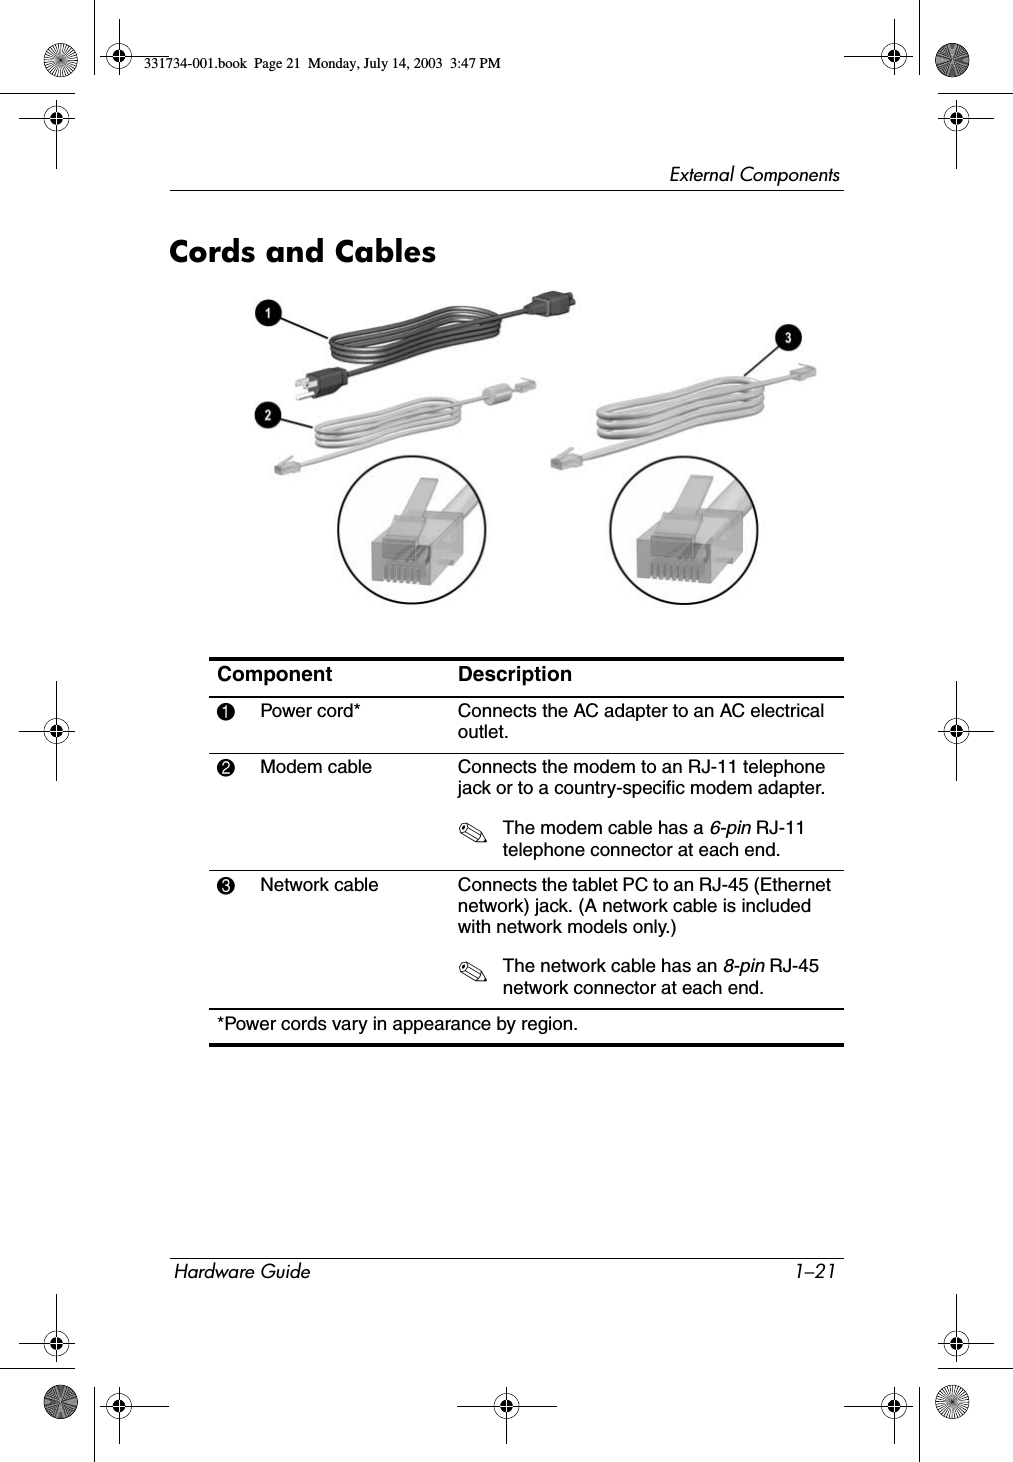 External ComponentsHardware Guide 1–21Cords and CablesComponent Description1Power cord* Connects the AC adapter to an AC electrical outlet.2Modem cable  Connects the modem to an RJ-11 telephone jack or to a country-specific modem adapter. ✎The modem cable has a 6-pin RJ-11 telephone connector at each end.3Network cable Connects the tablet PC to an RJ-45 (Ethernet network) jack. (A network cable is included with network models only.)✎The network cable has an 8-pin RJ-45 network connector at each end.*Power cords vary in appearance by region.331734-001.book  Page 21  Monday, July 14, 2003  3:47 PM